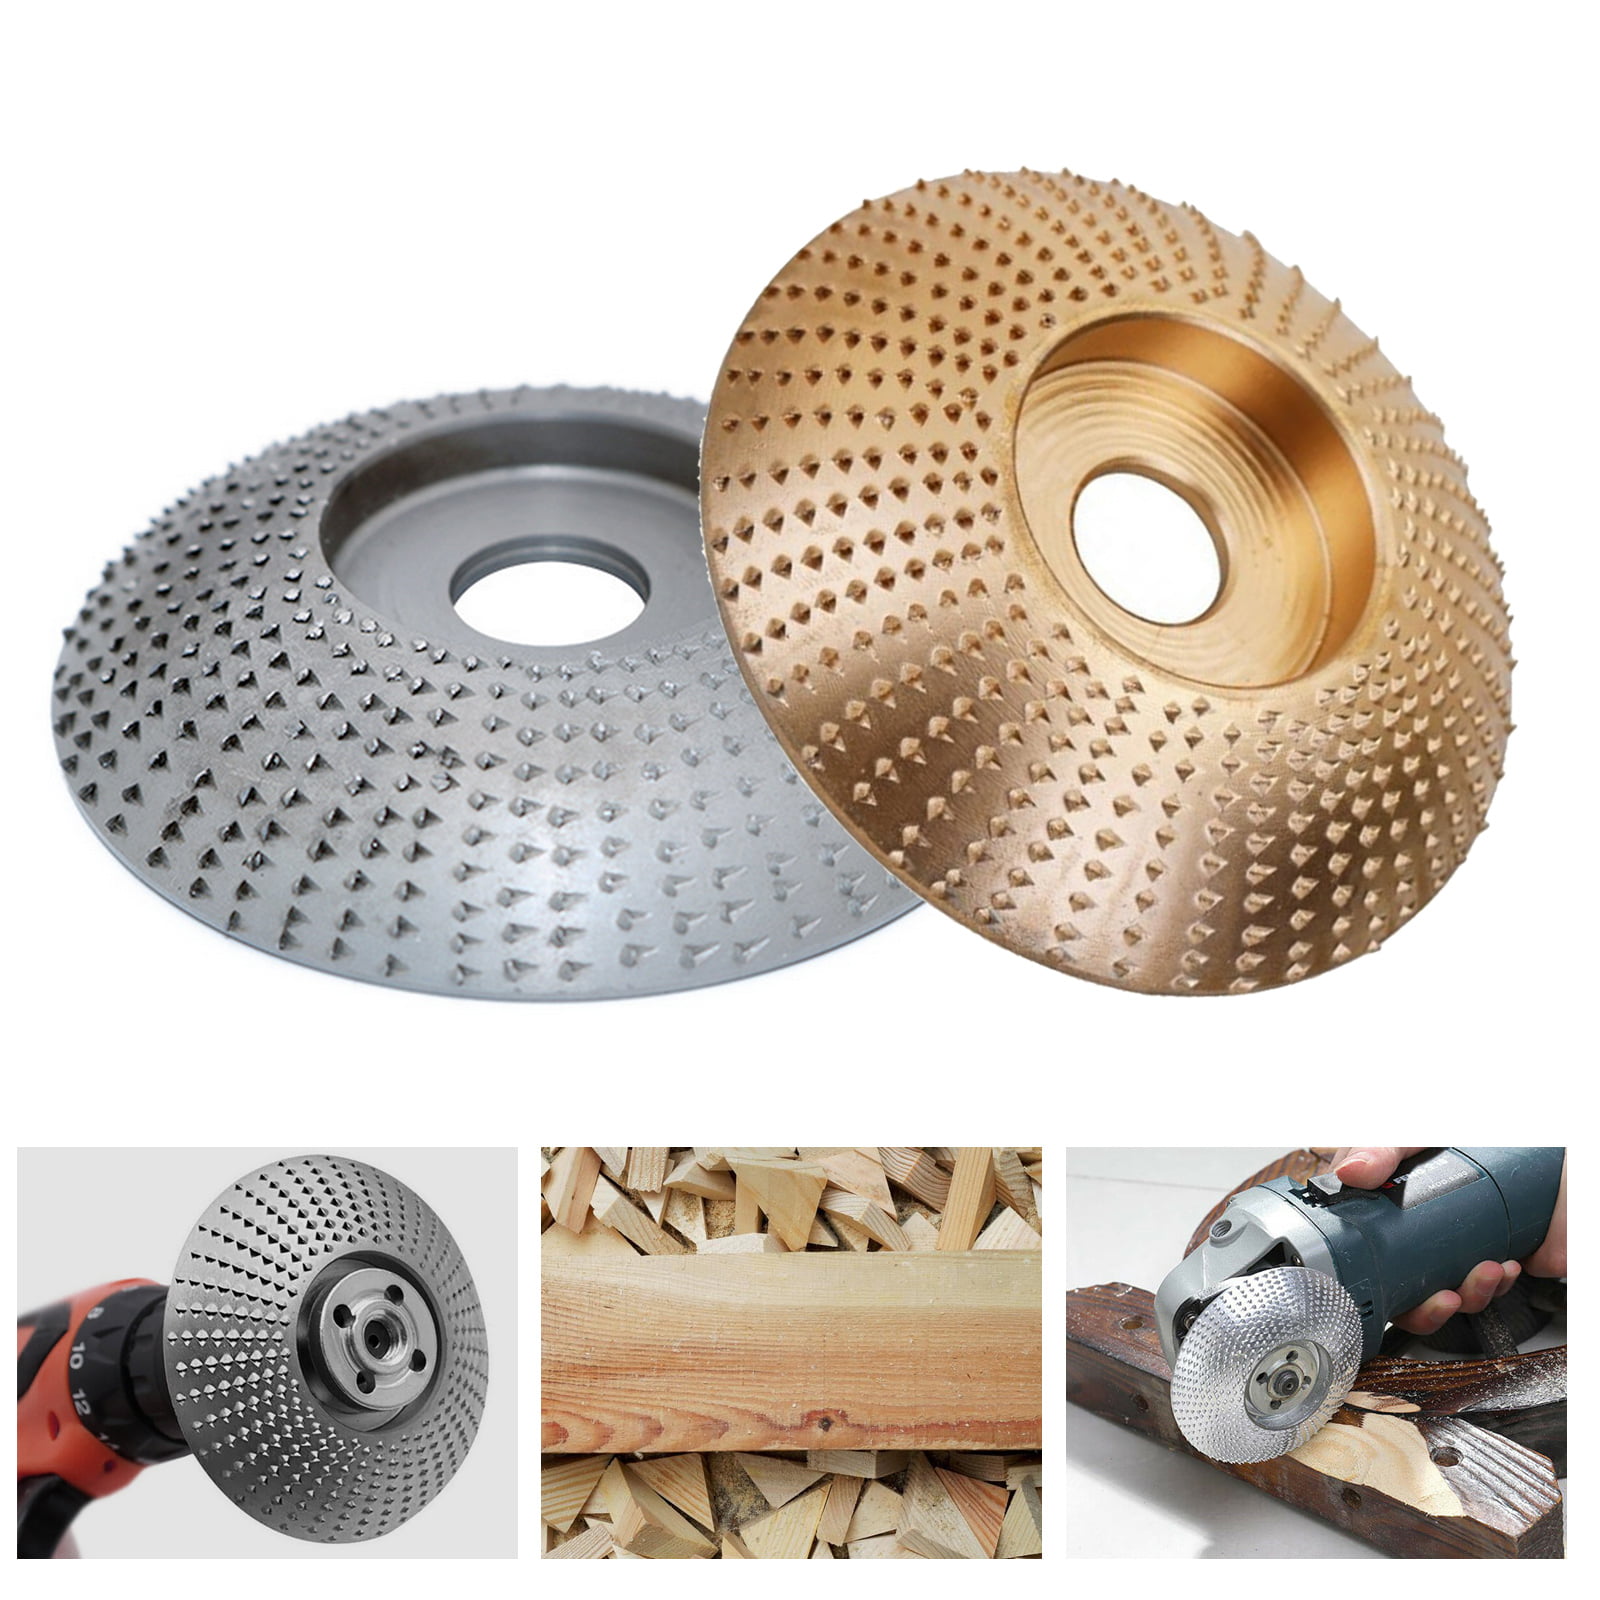 Carbide Wood Sanding Carving Shaping Disc For Angle Grinder Grinding Wheel US 